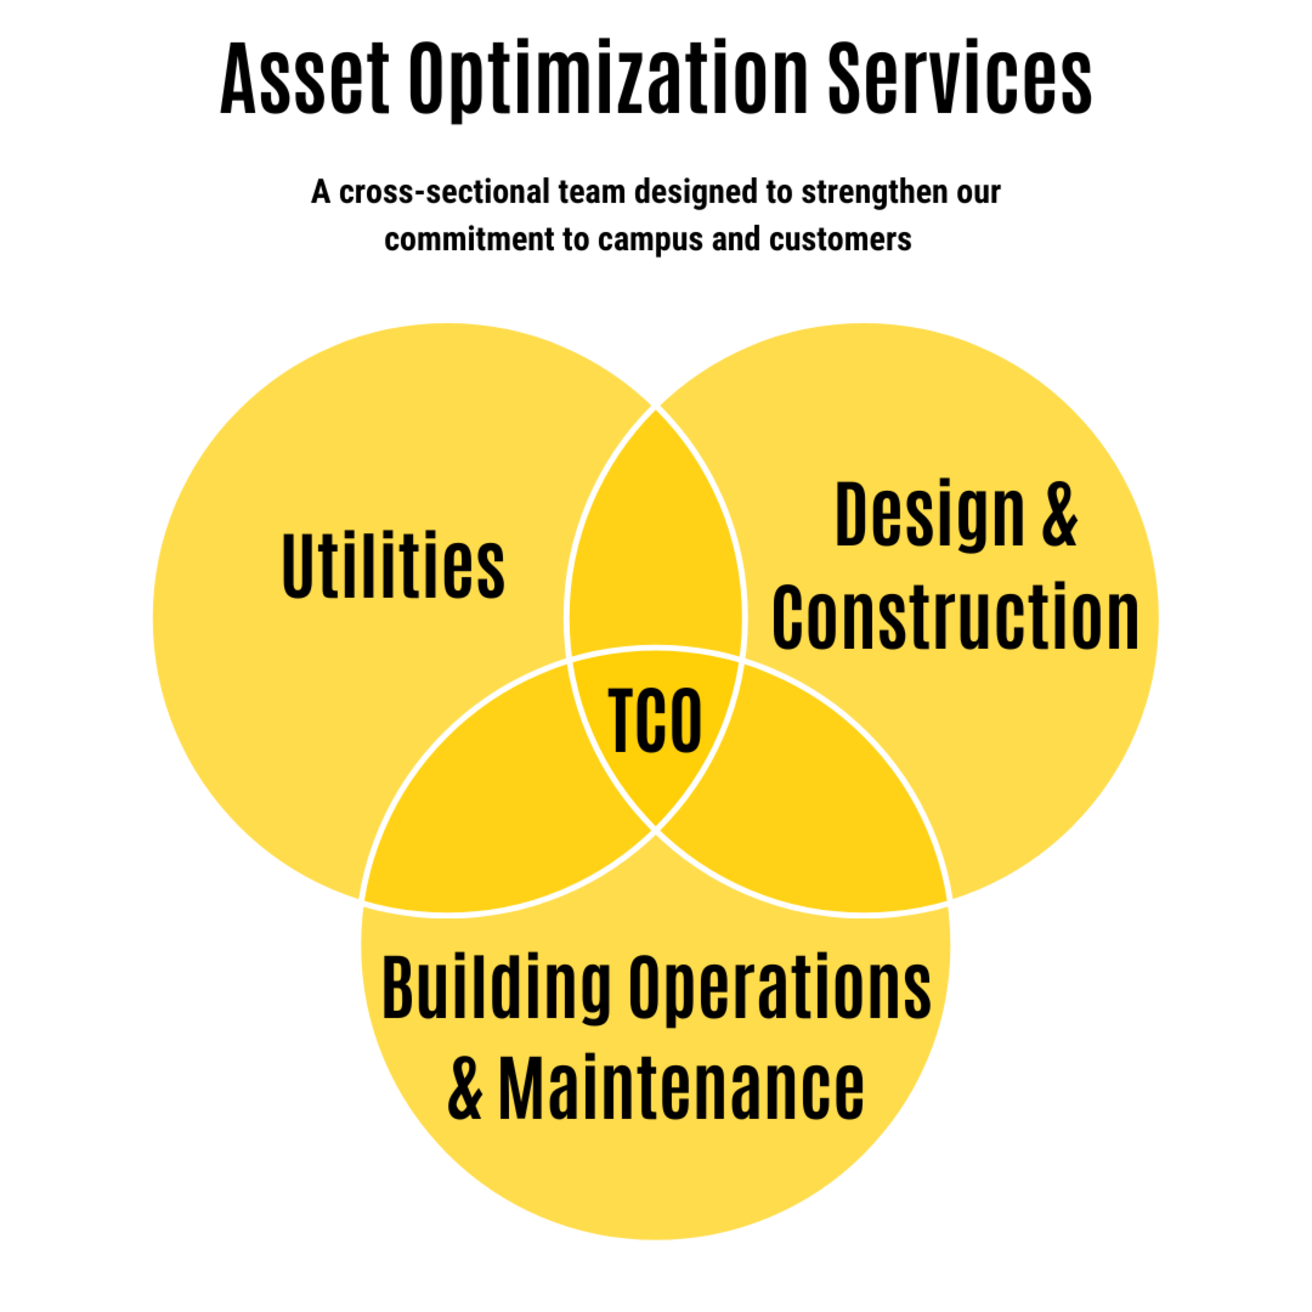 Venn diagram depicting the overlap of Design & Construction, Utilities, and Building Operations & Maintenance